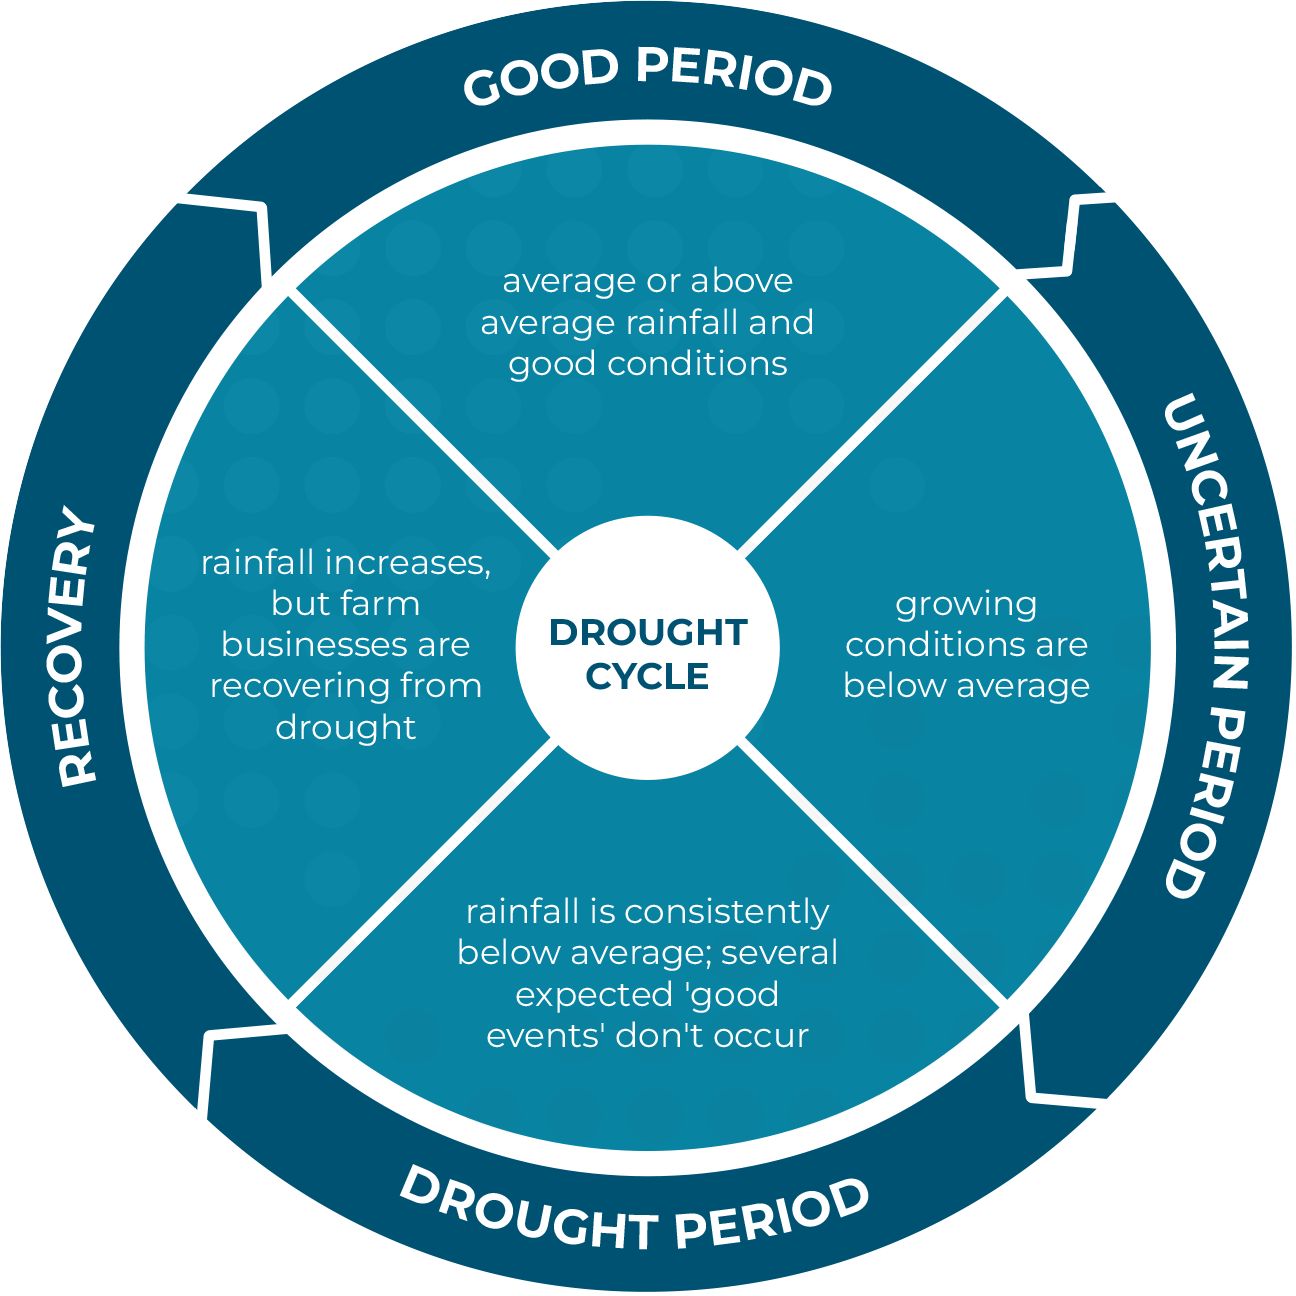 The Drought Cycle